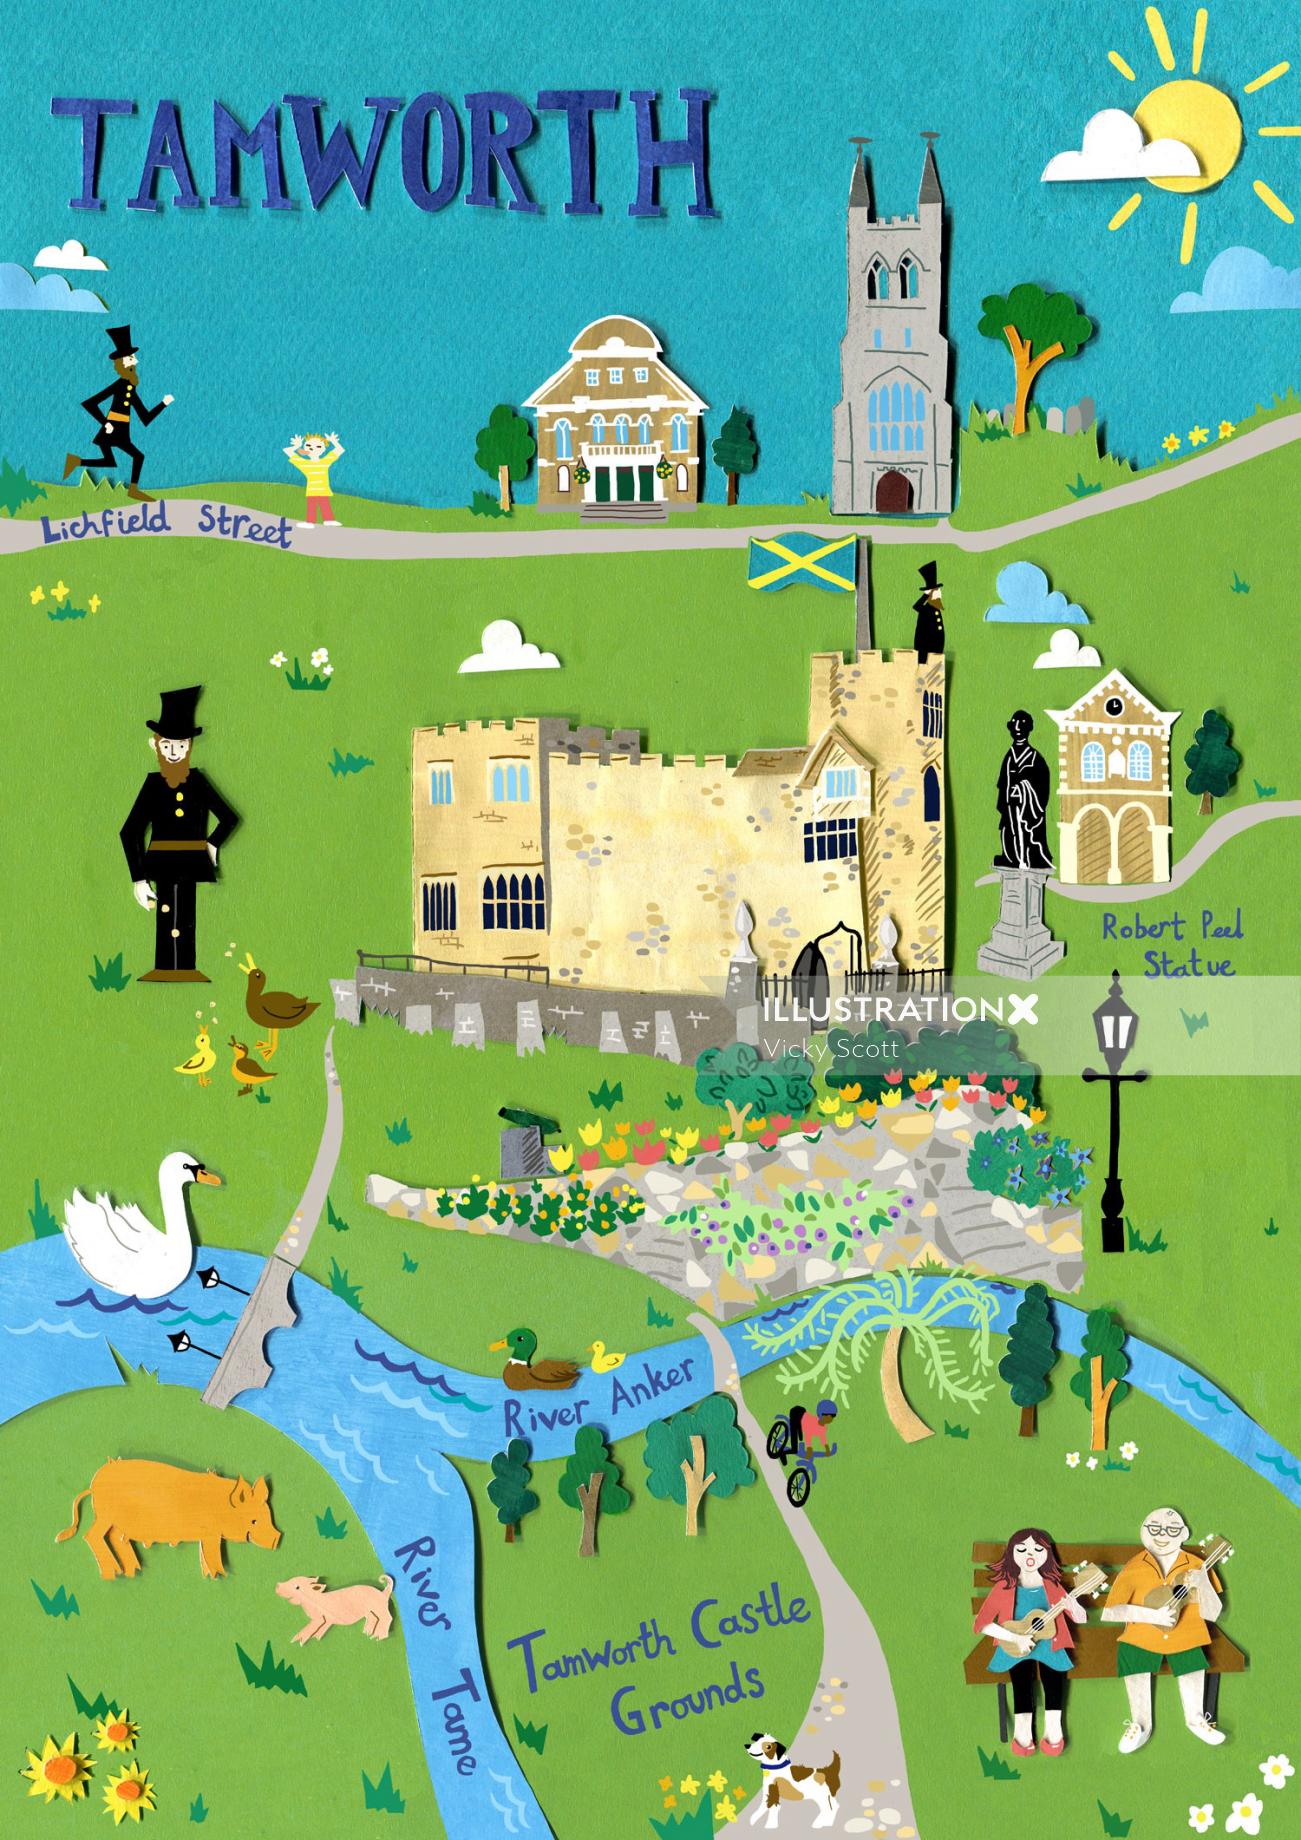 tamworth, map,castle, history, church, pigs, policeman, statue, swans, flowers